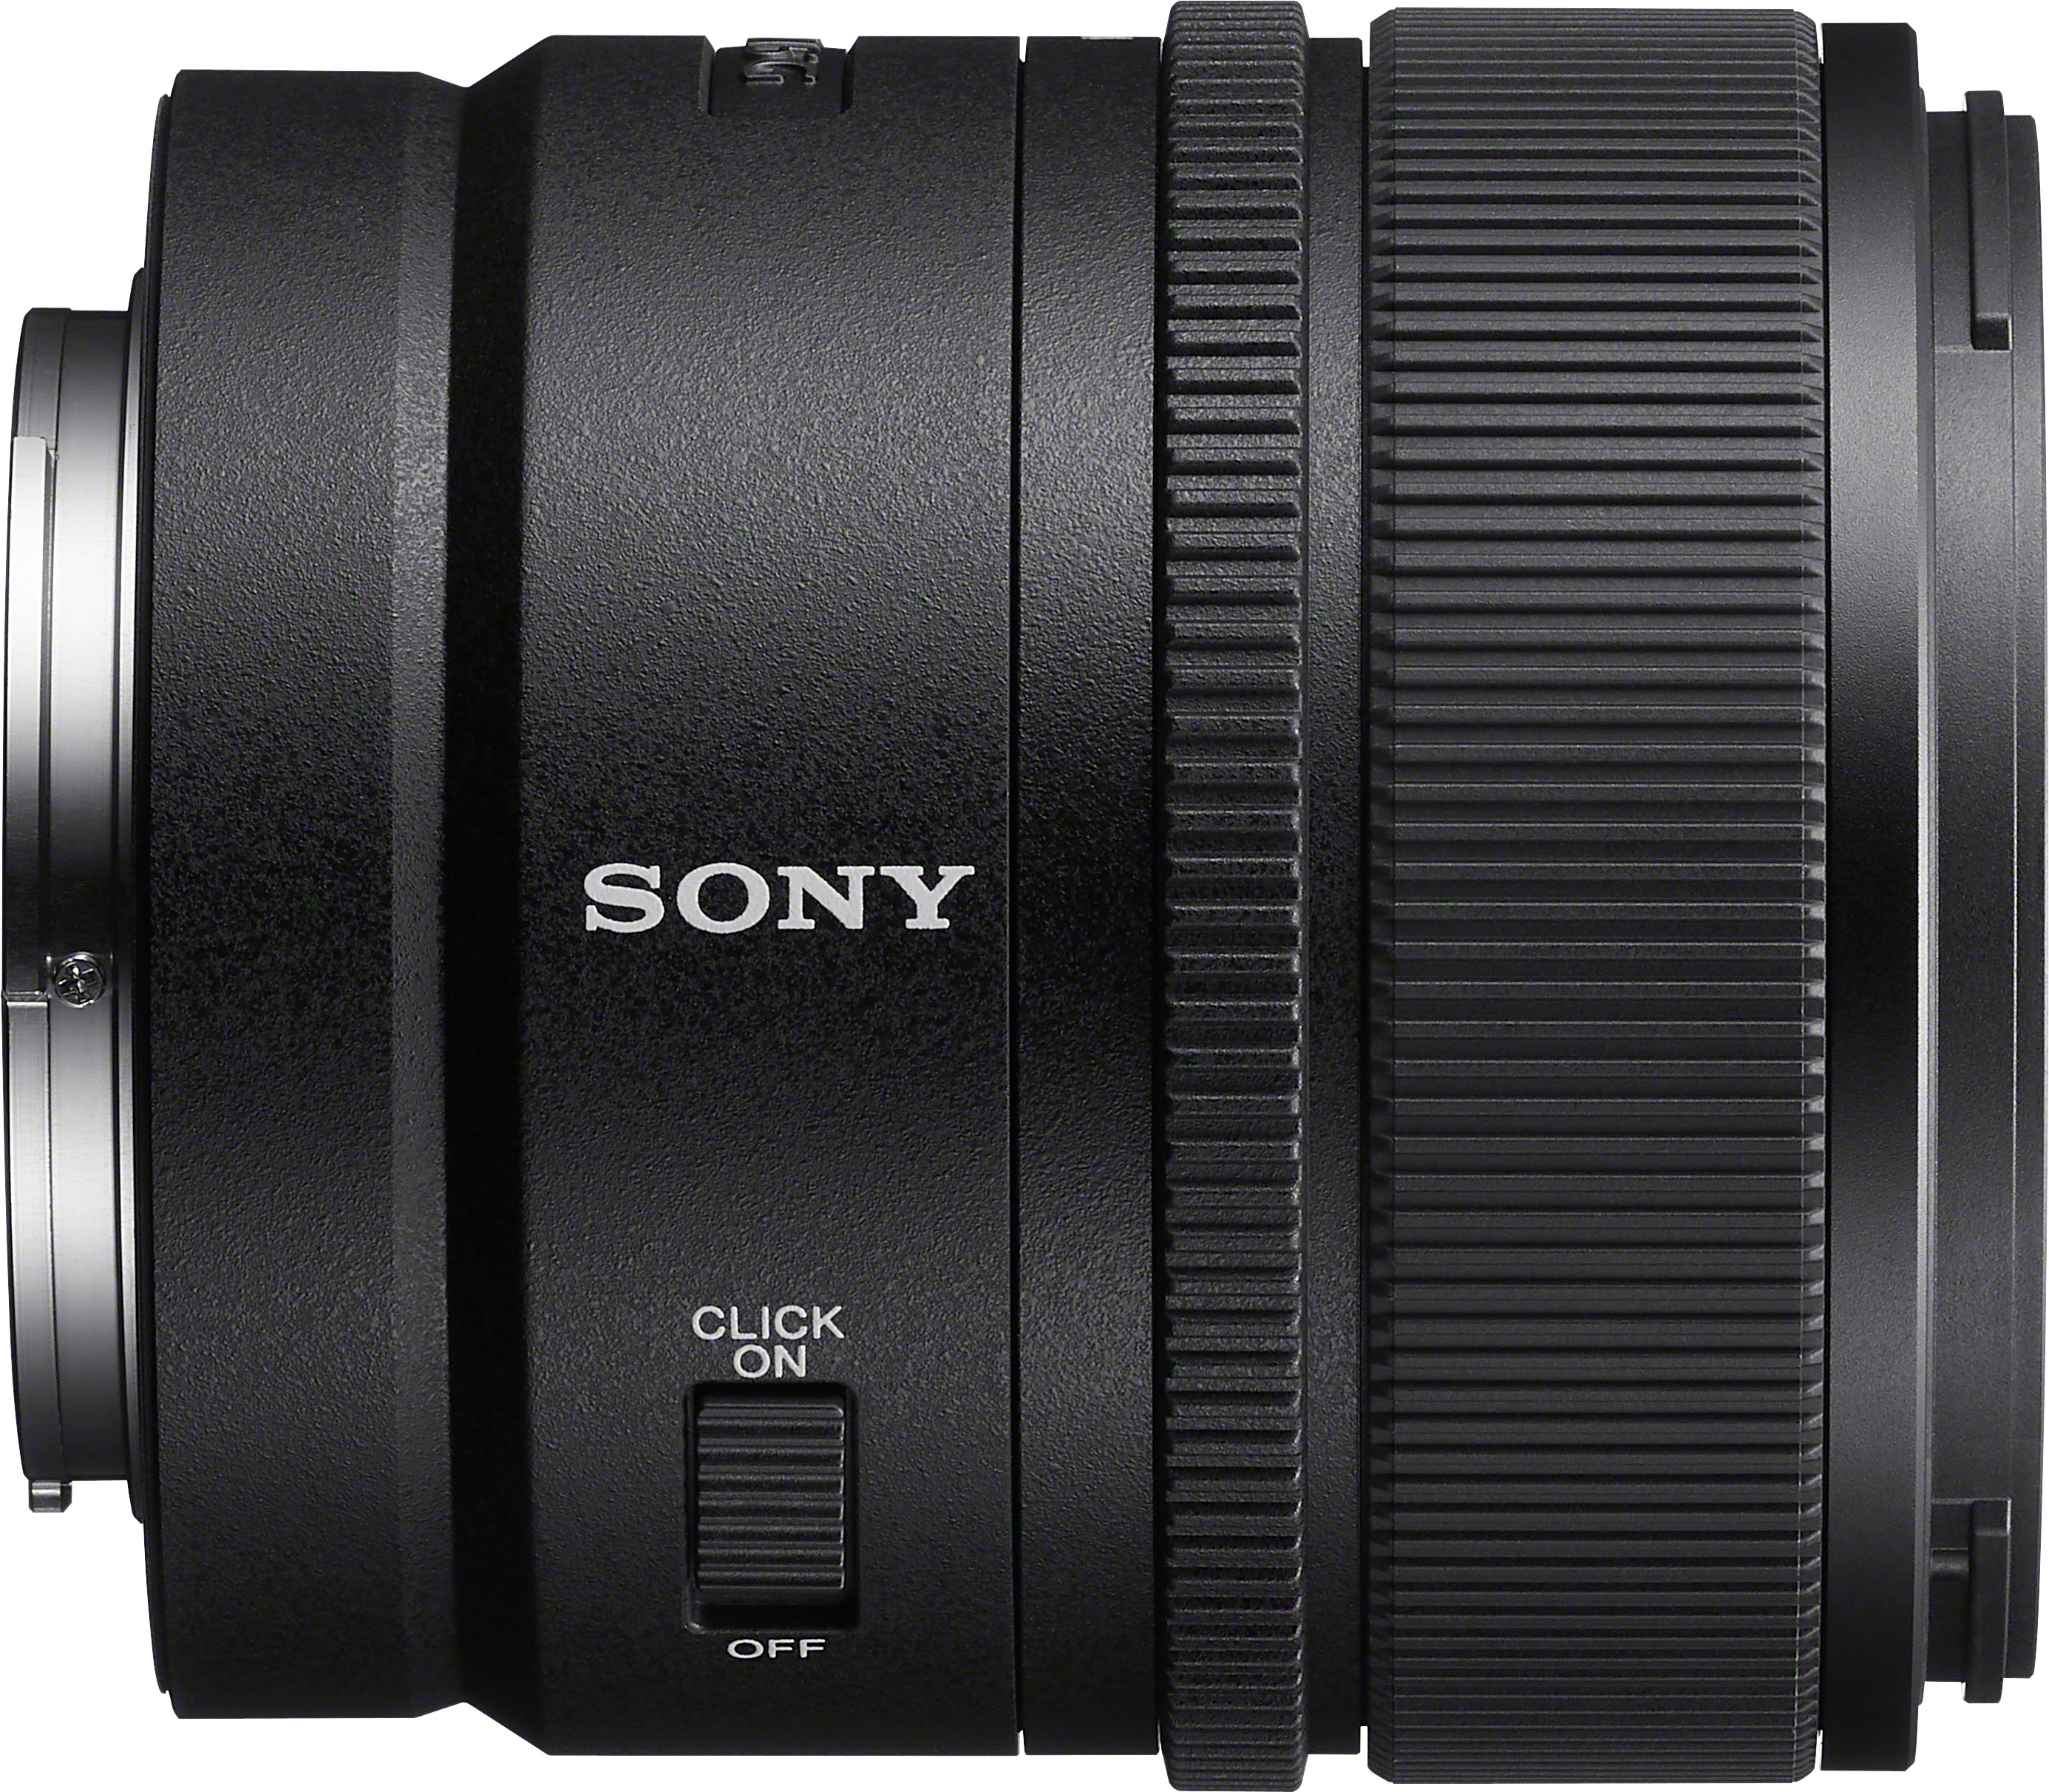 Tamron 70-300mm F/4.5-6.3 Di III RXD Lens for Sony Mirrorless Full  Frame/APS-C E-Mount, Black (Renewed) : Electronics 